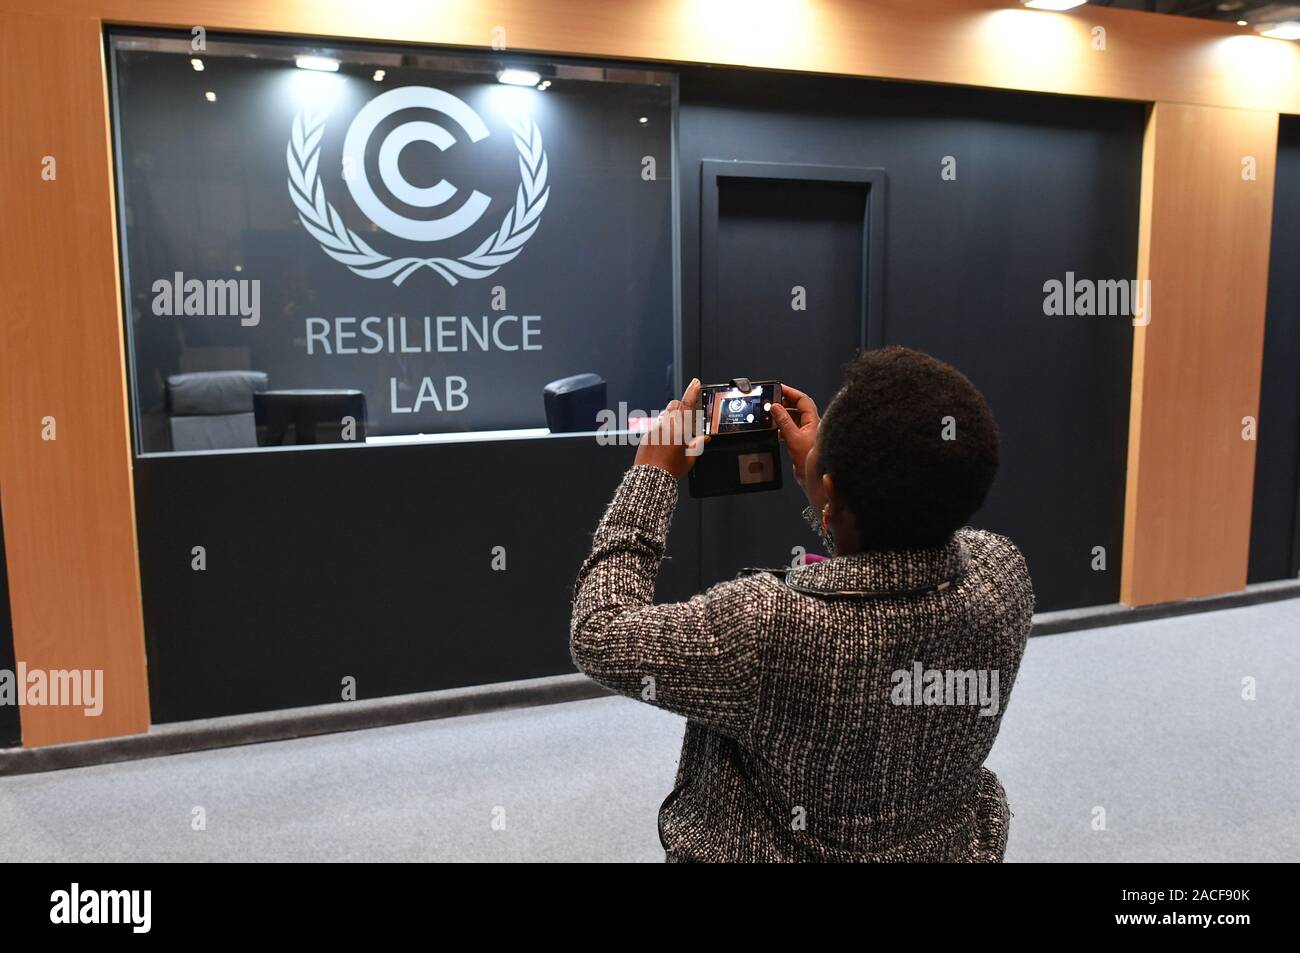 *** STRICTLY NO SALES TO FRENCH MEDIA OR PUBLISHERS *** December 02, 2019 - Madrid, Spain: Atmosphere at the venue of the UN climate conference COP25, where countries and international groups have set up their own pavilion to promote their action against global warming. Ambiance dans les couloirs de la conference pour le climat COP25 a Madrid. Stock Photo